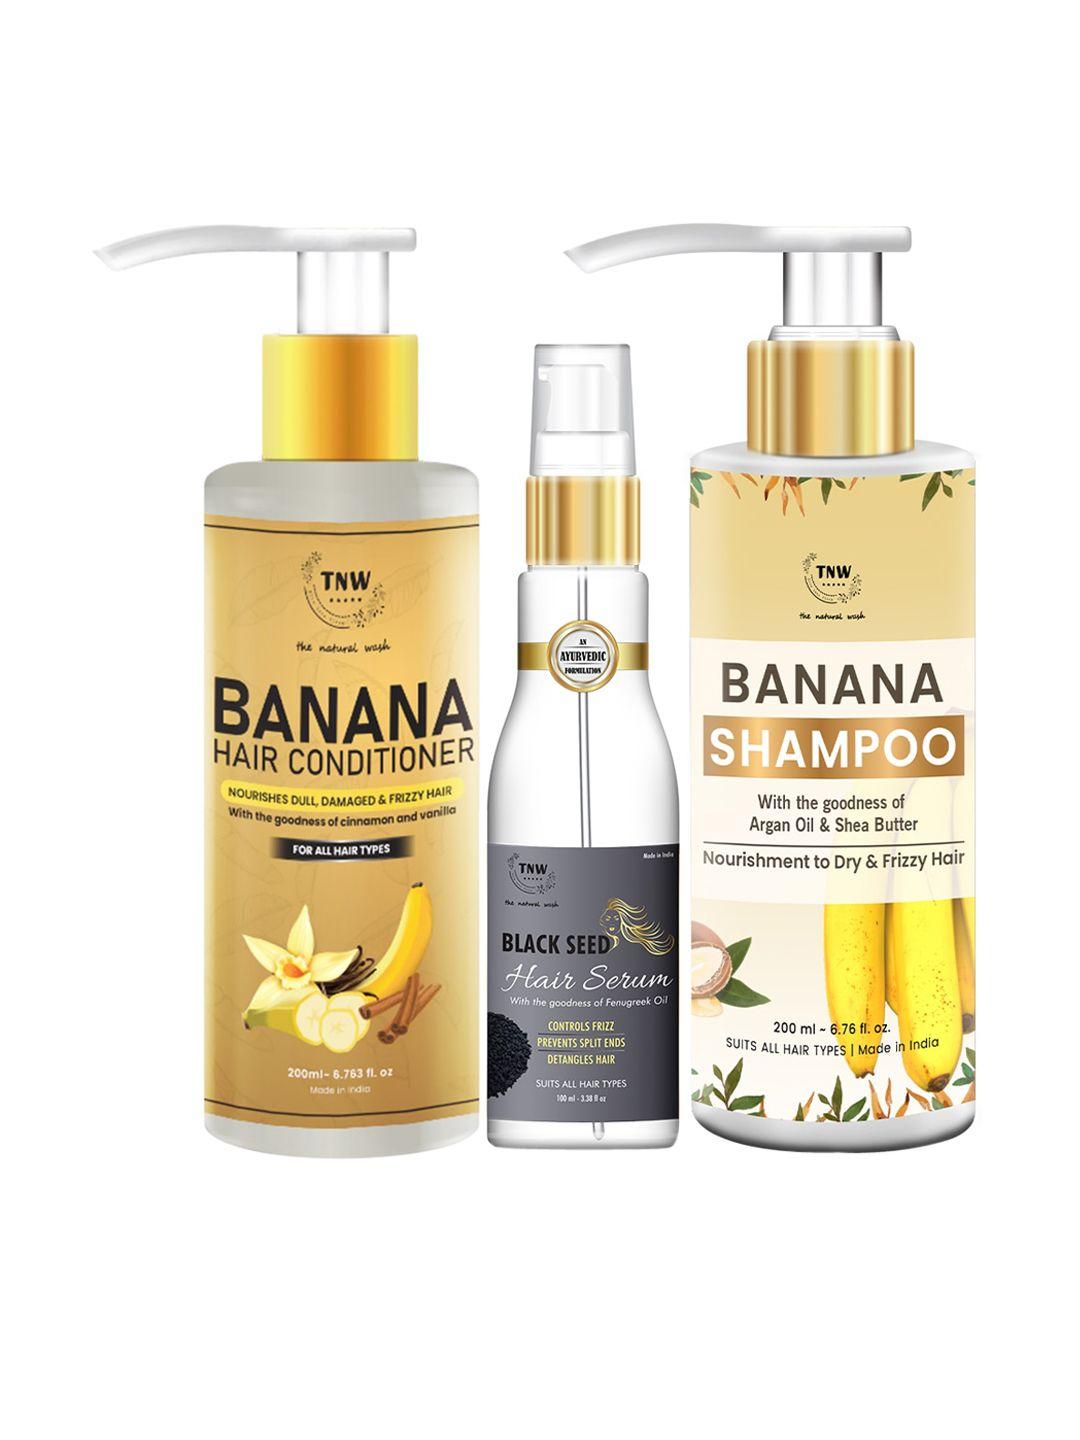 tnw the natural wash banana shampoo with  black seed serum & conditioner